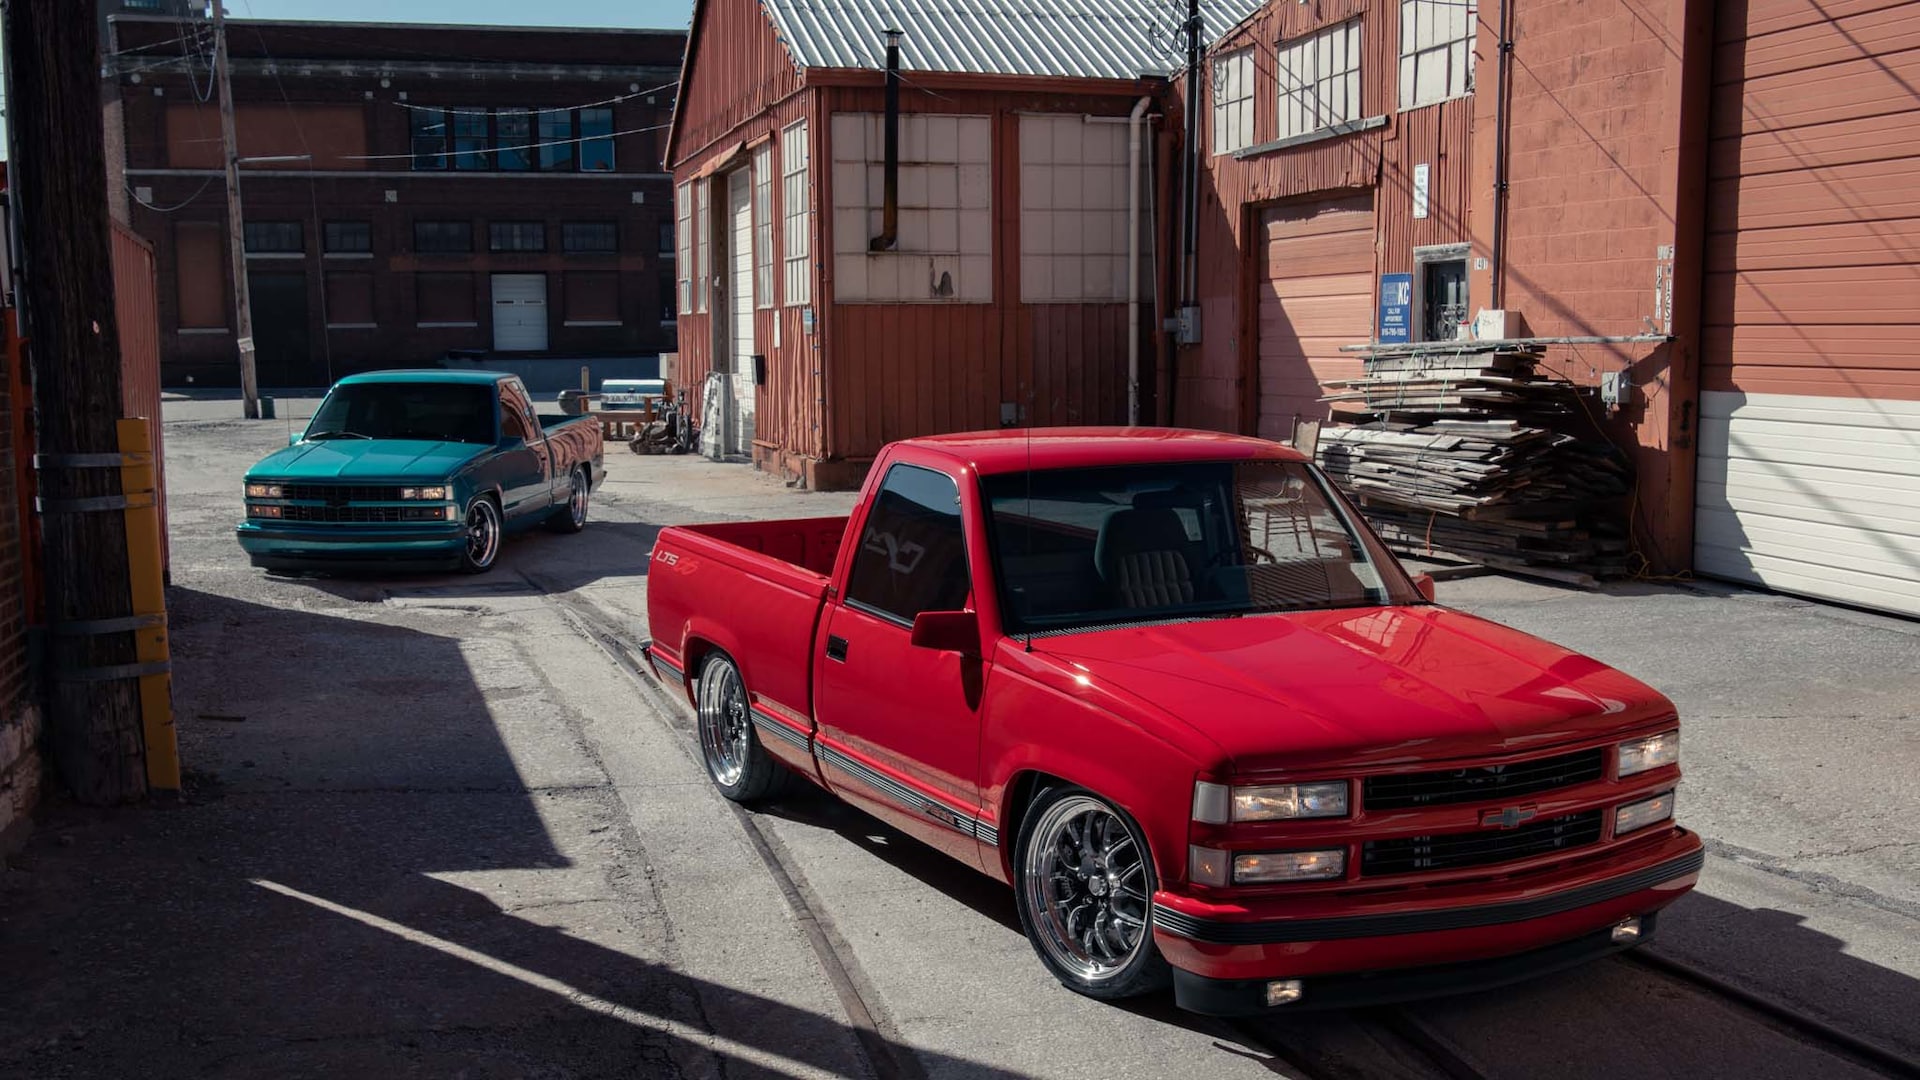 There's Corvette Power In This Pair Of LT Swapped Chevy OBS Pickups!